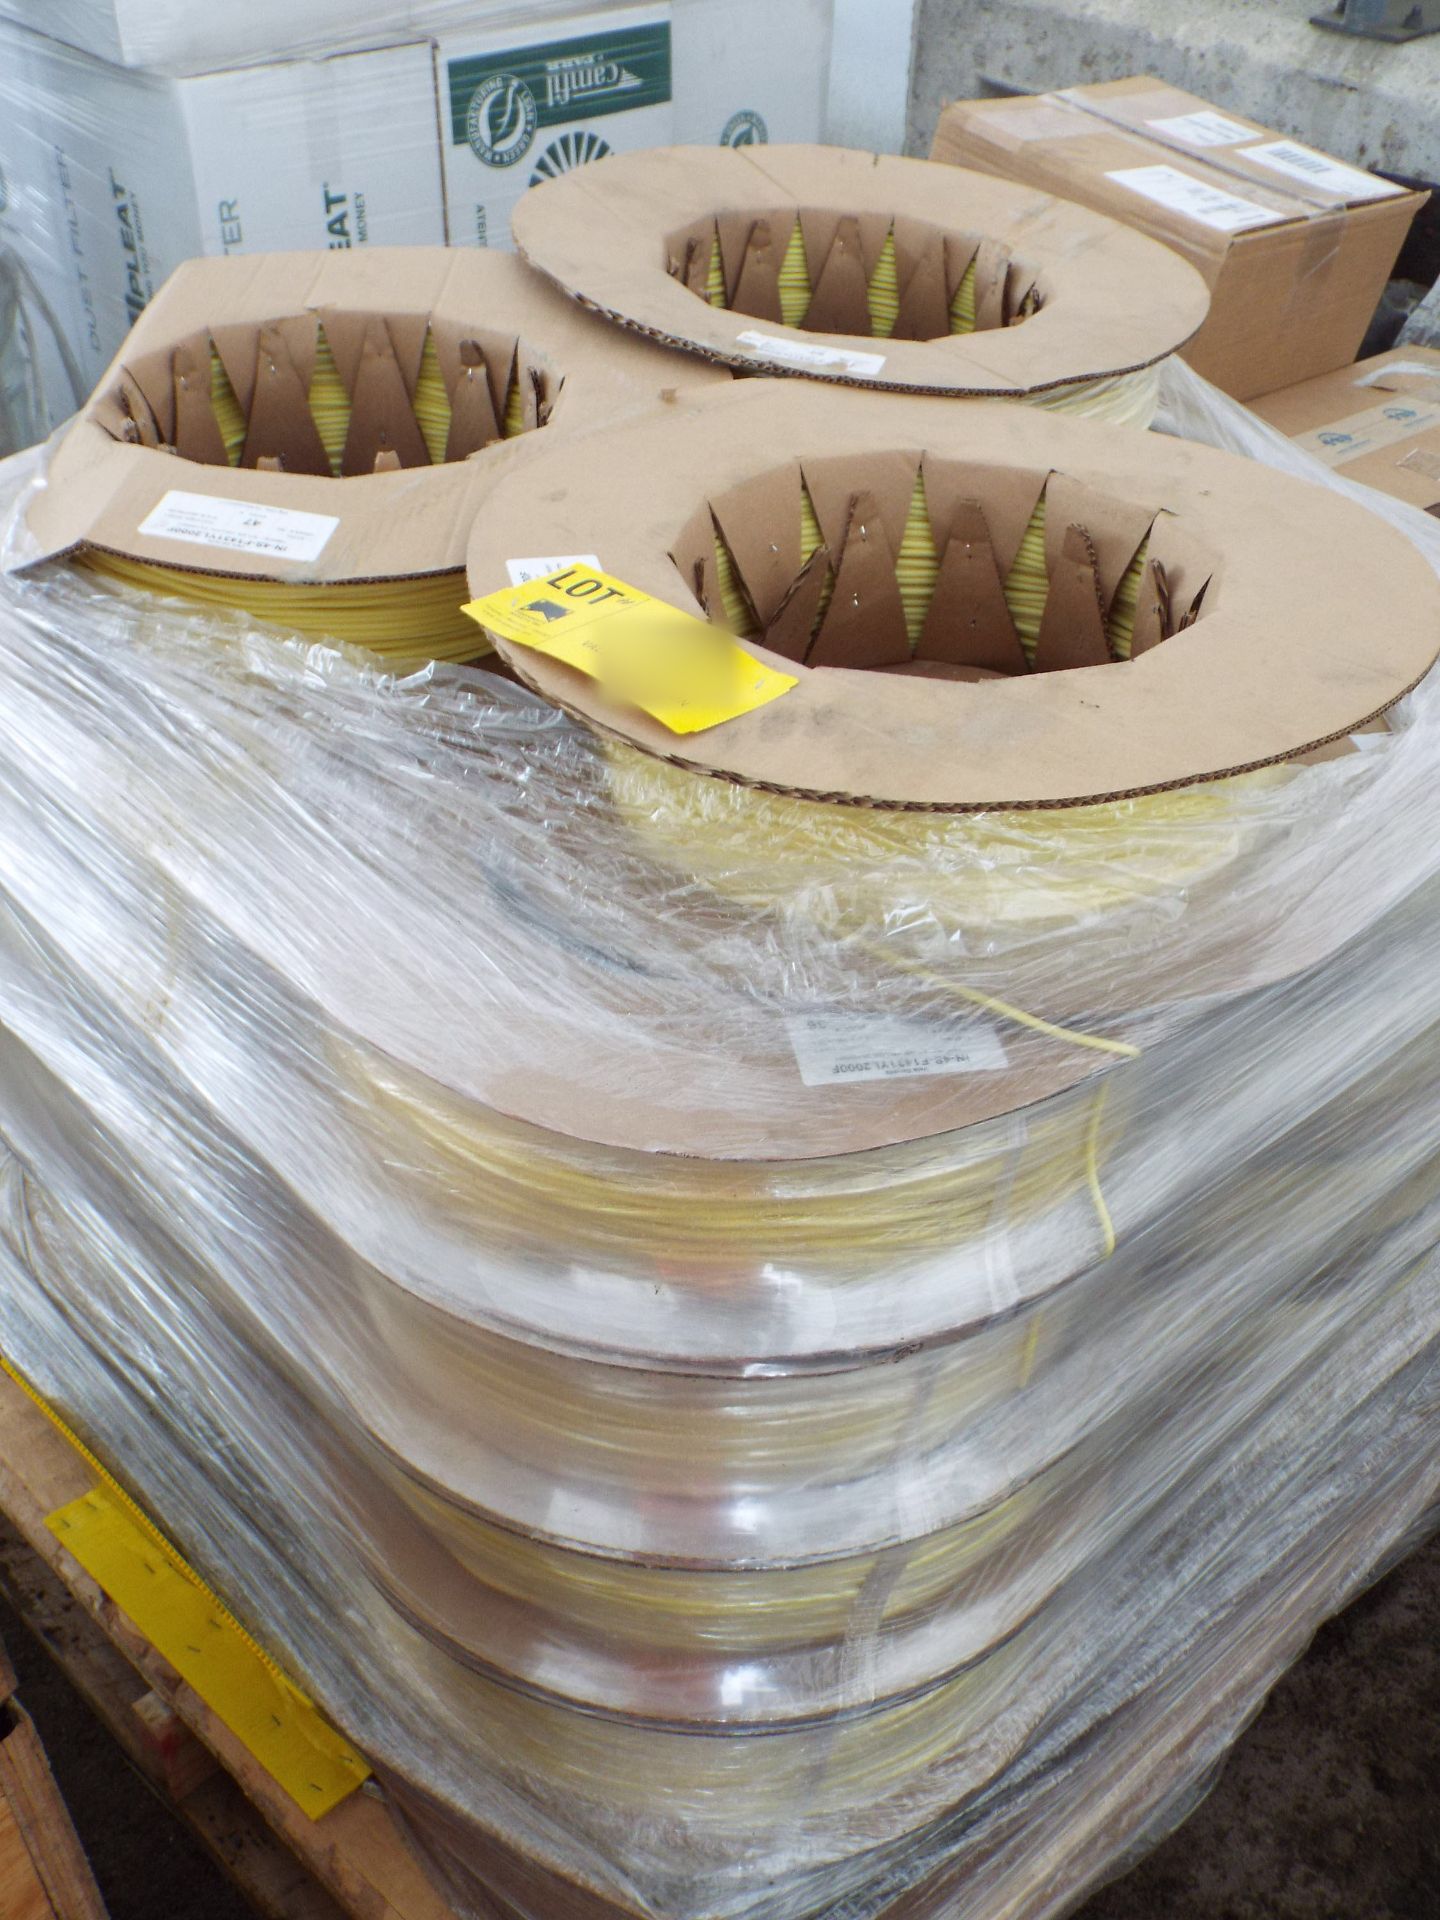 LOT/ CONTENTS OF SKID - (APPROX. 19) 2000 FT. SPOOLS OF SPLINE YELLOW TUBING (PLT 115)